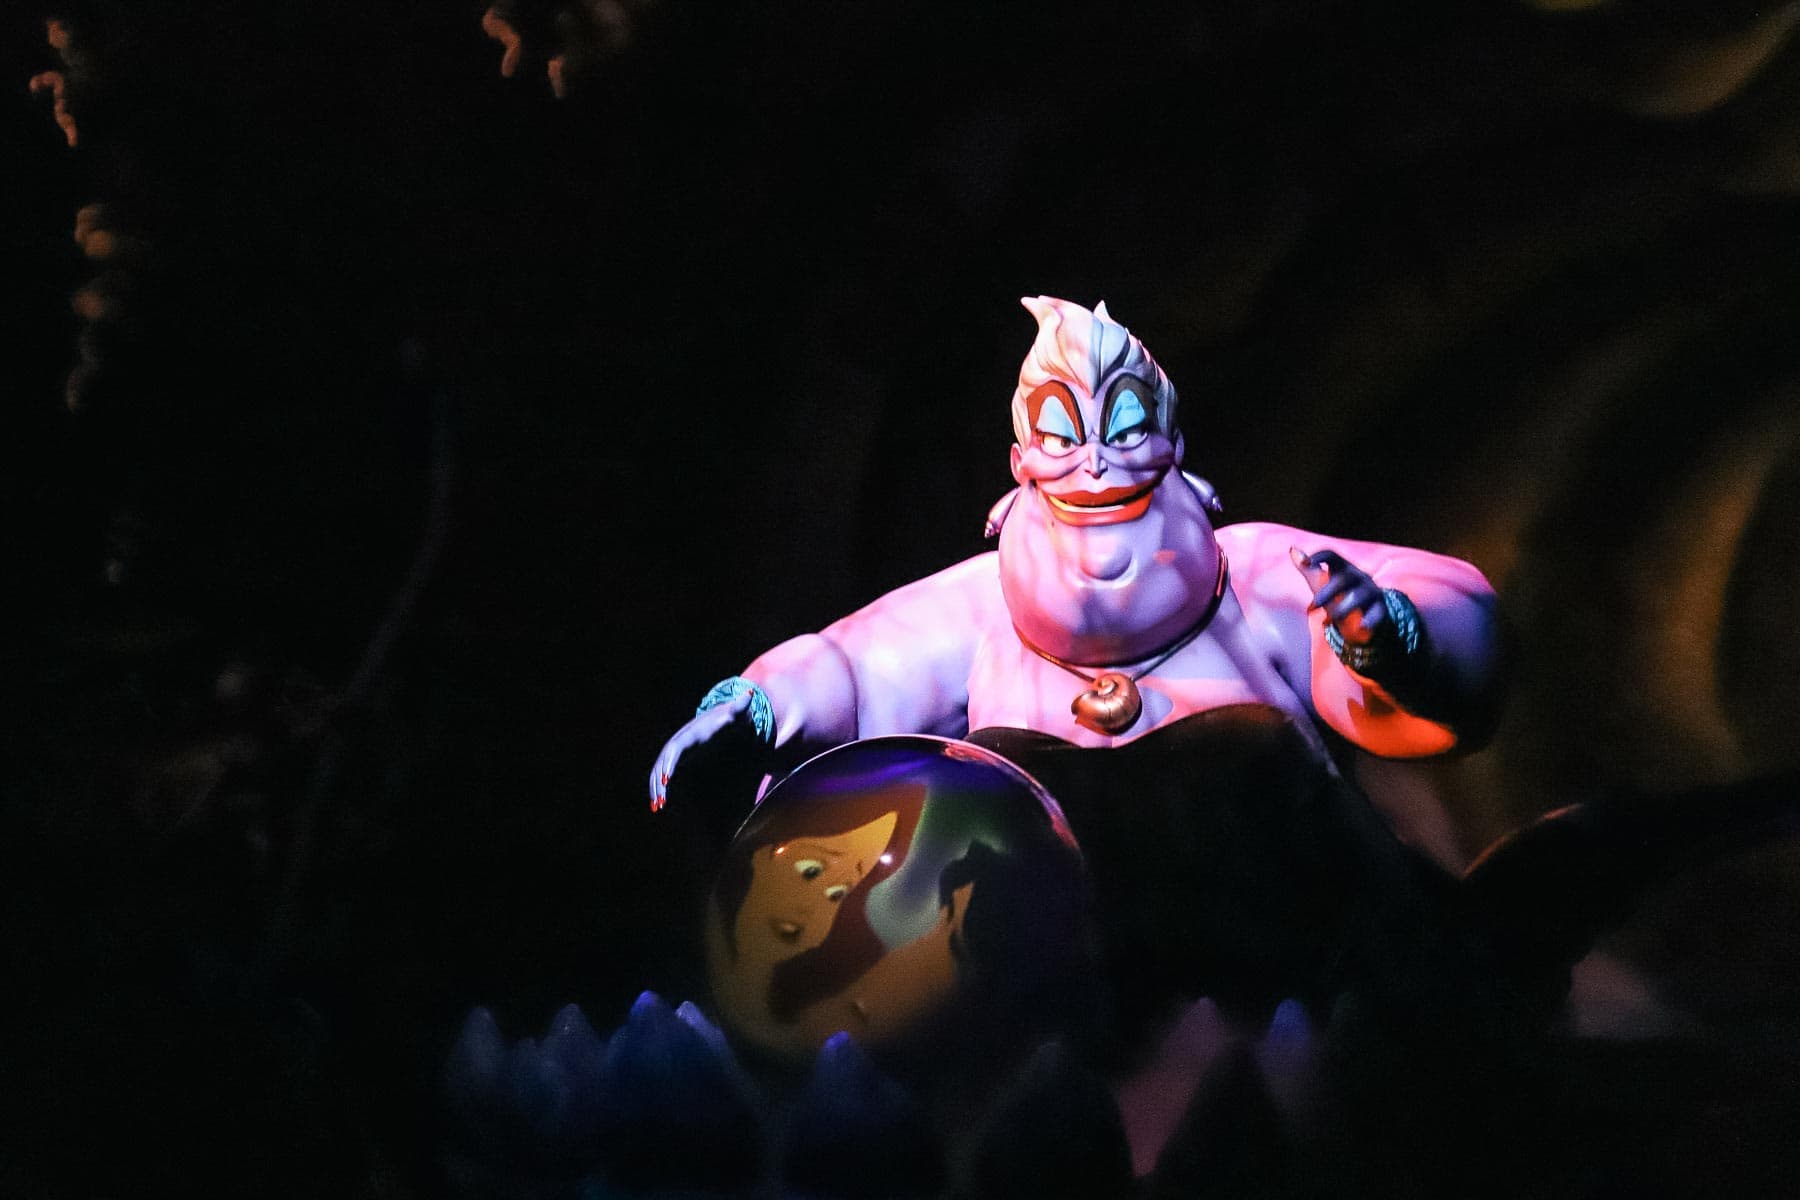 Ursula as she plots against Ariel and Prince Eric ride scene. 